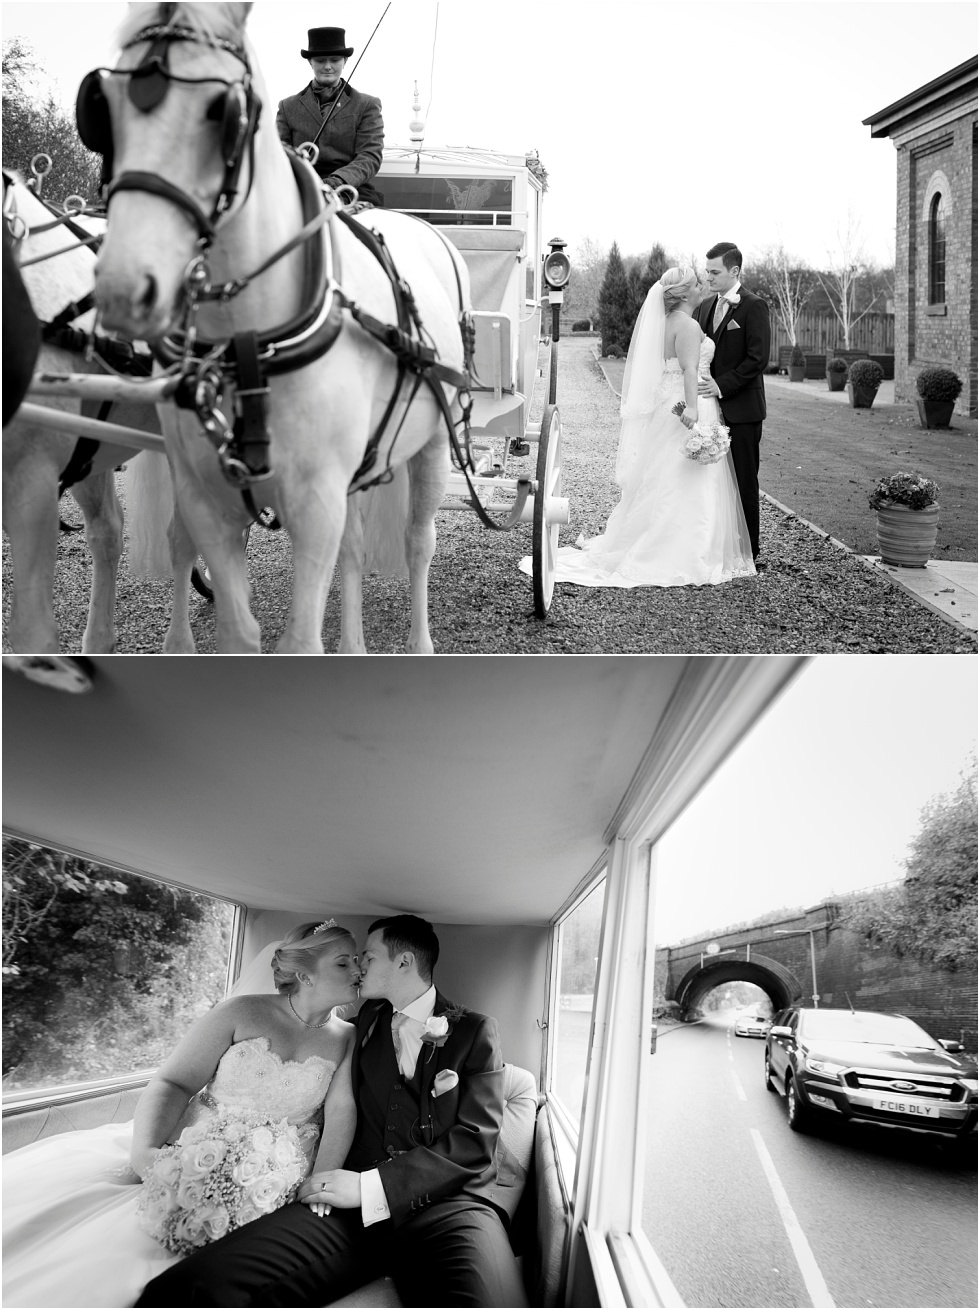 Wedding_at_The_Carriage_Hall_Plumtree_Nottingham_By_Nottingham_Wedding_Photographers_Matt_Selby_Photography_15